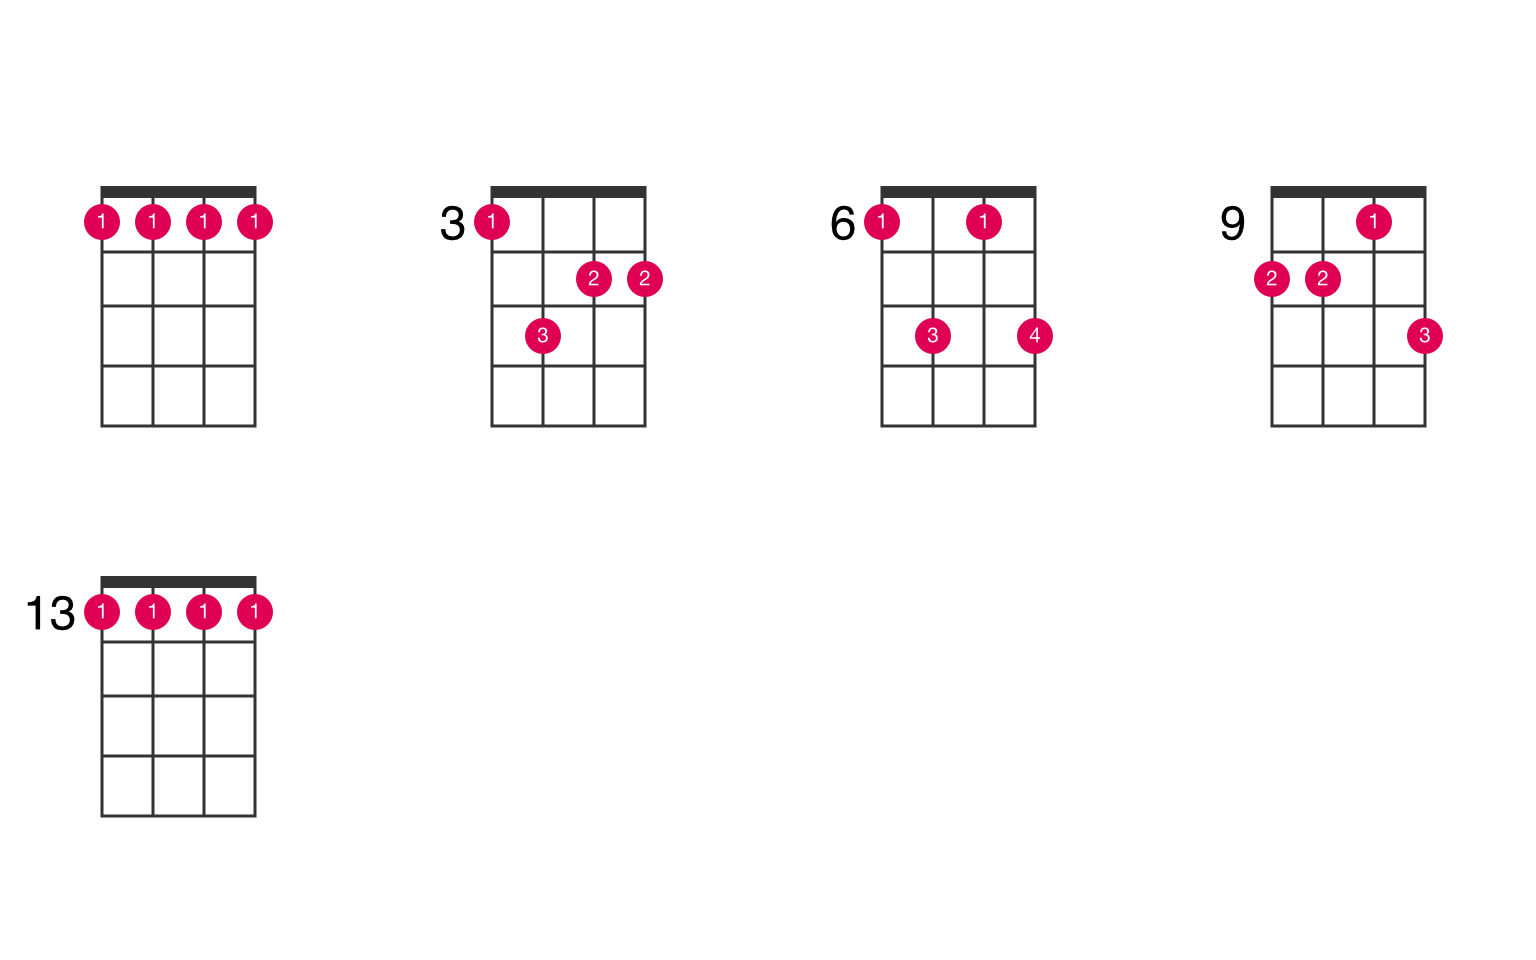 chords to play over b flat minor blues scale